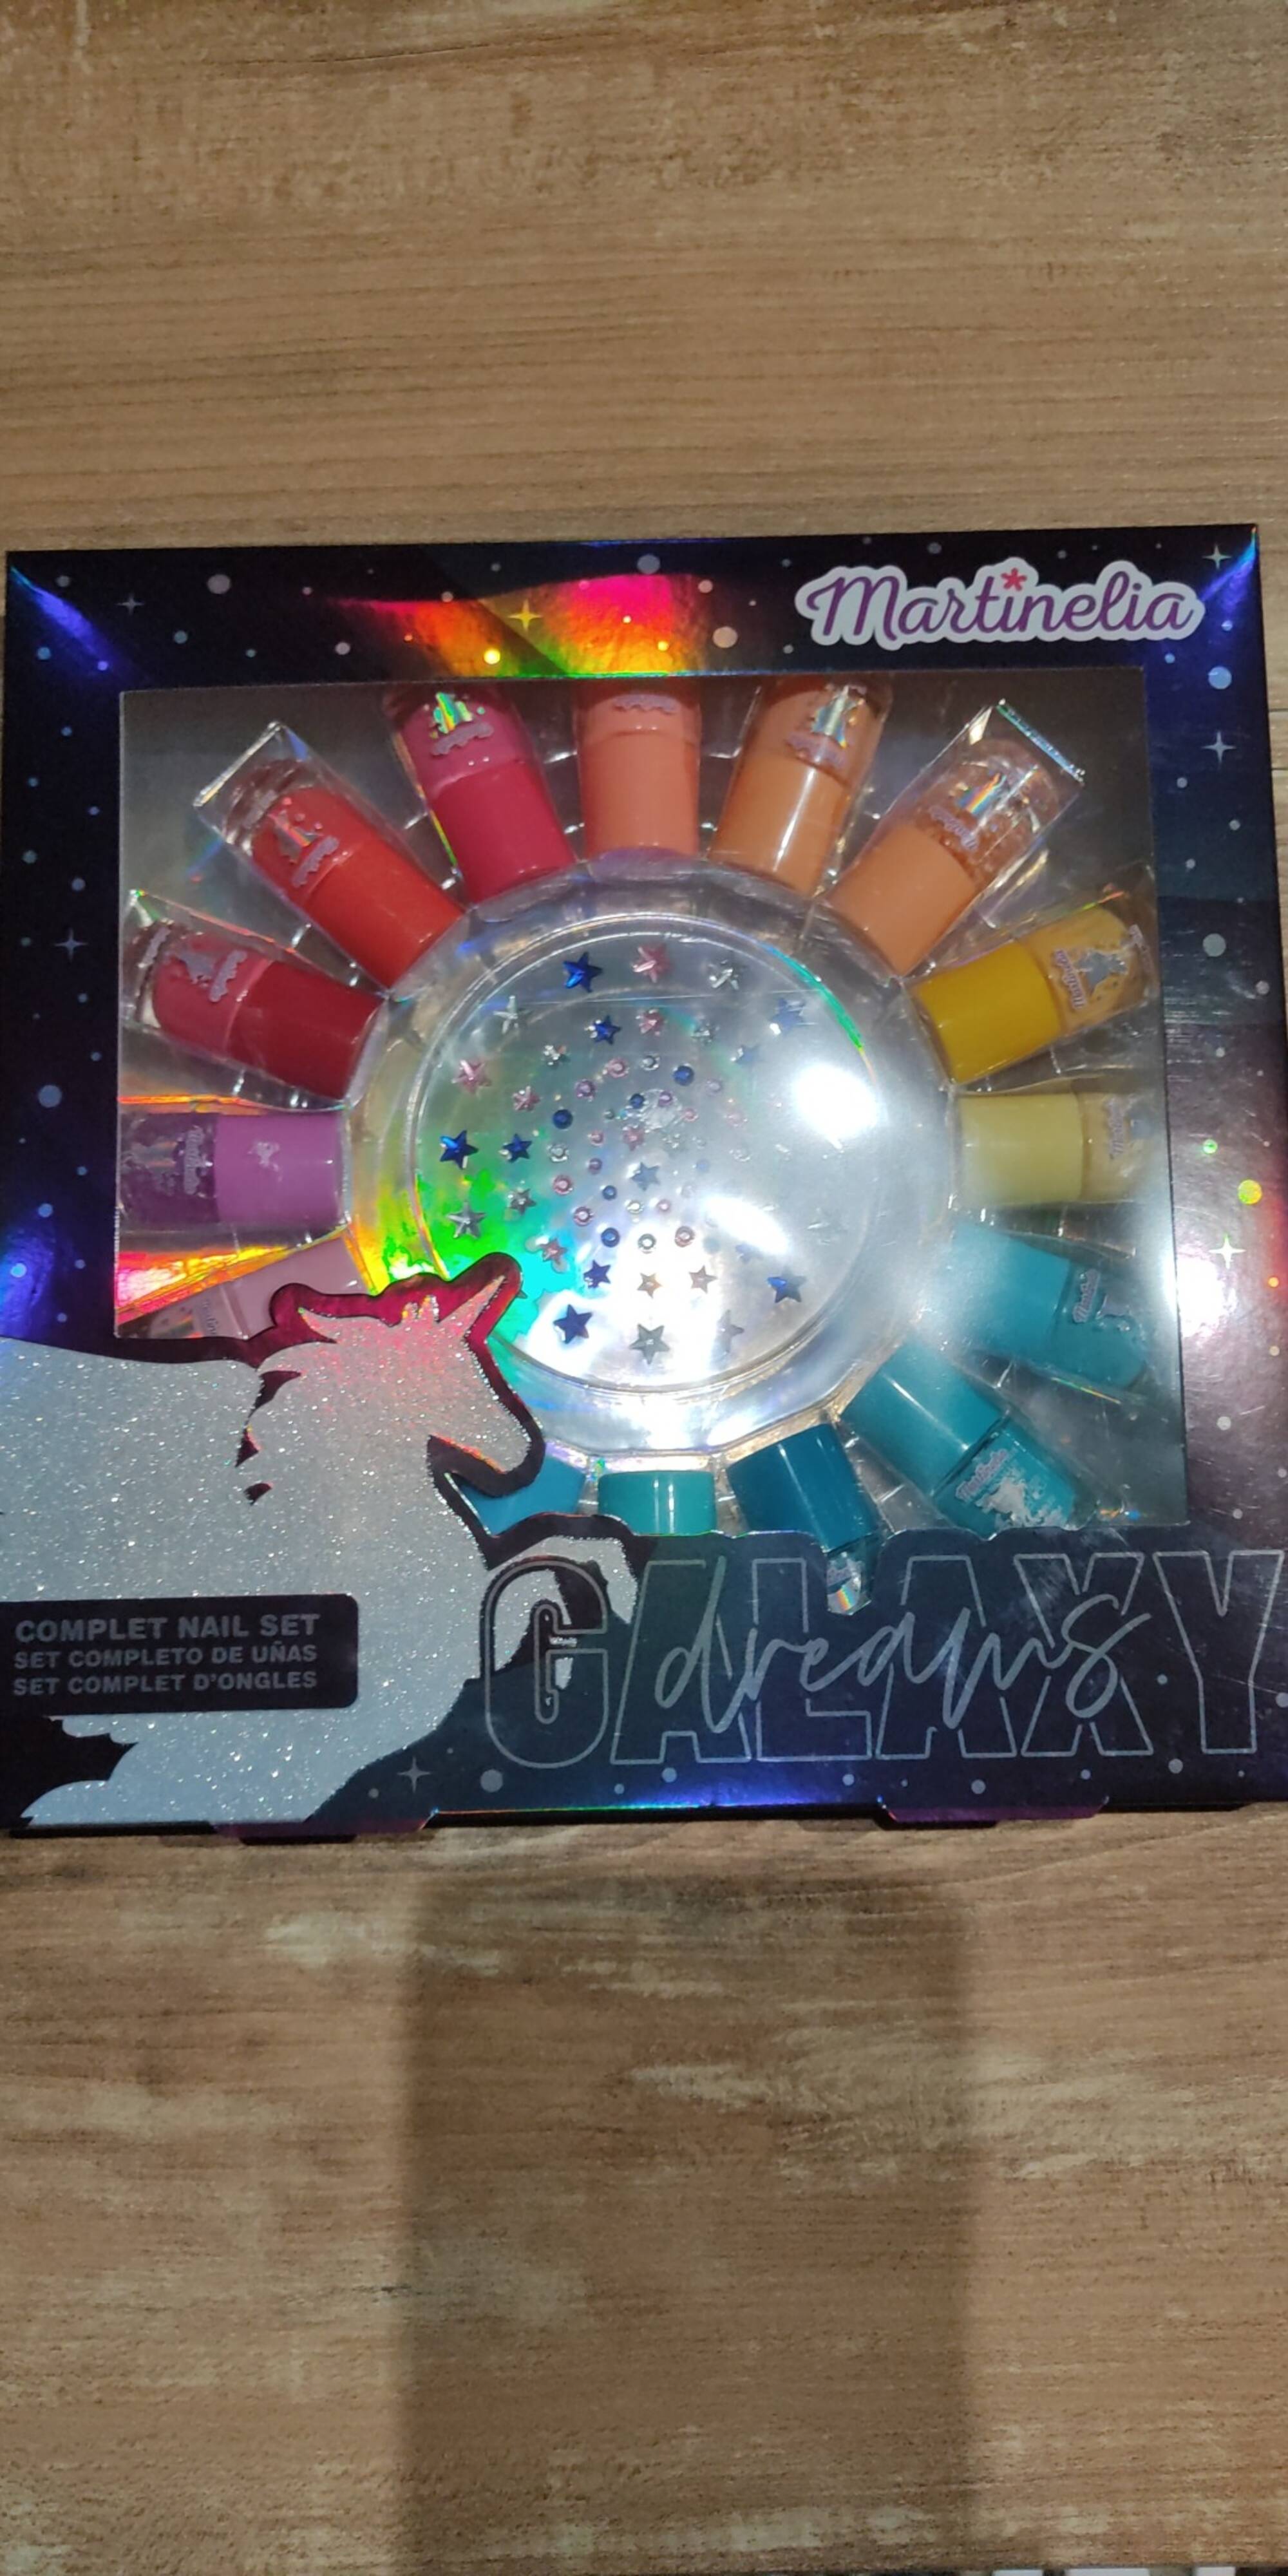 MARTINELIA - Galaxy dreams - Set complet d'ongles